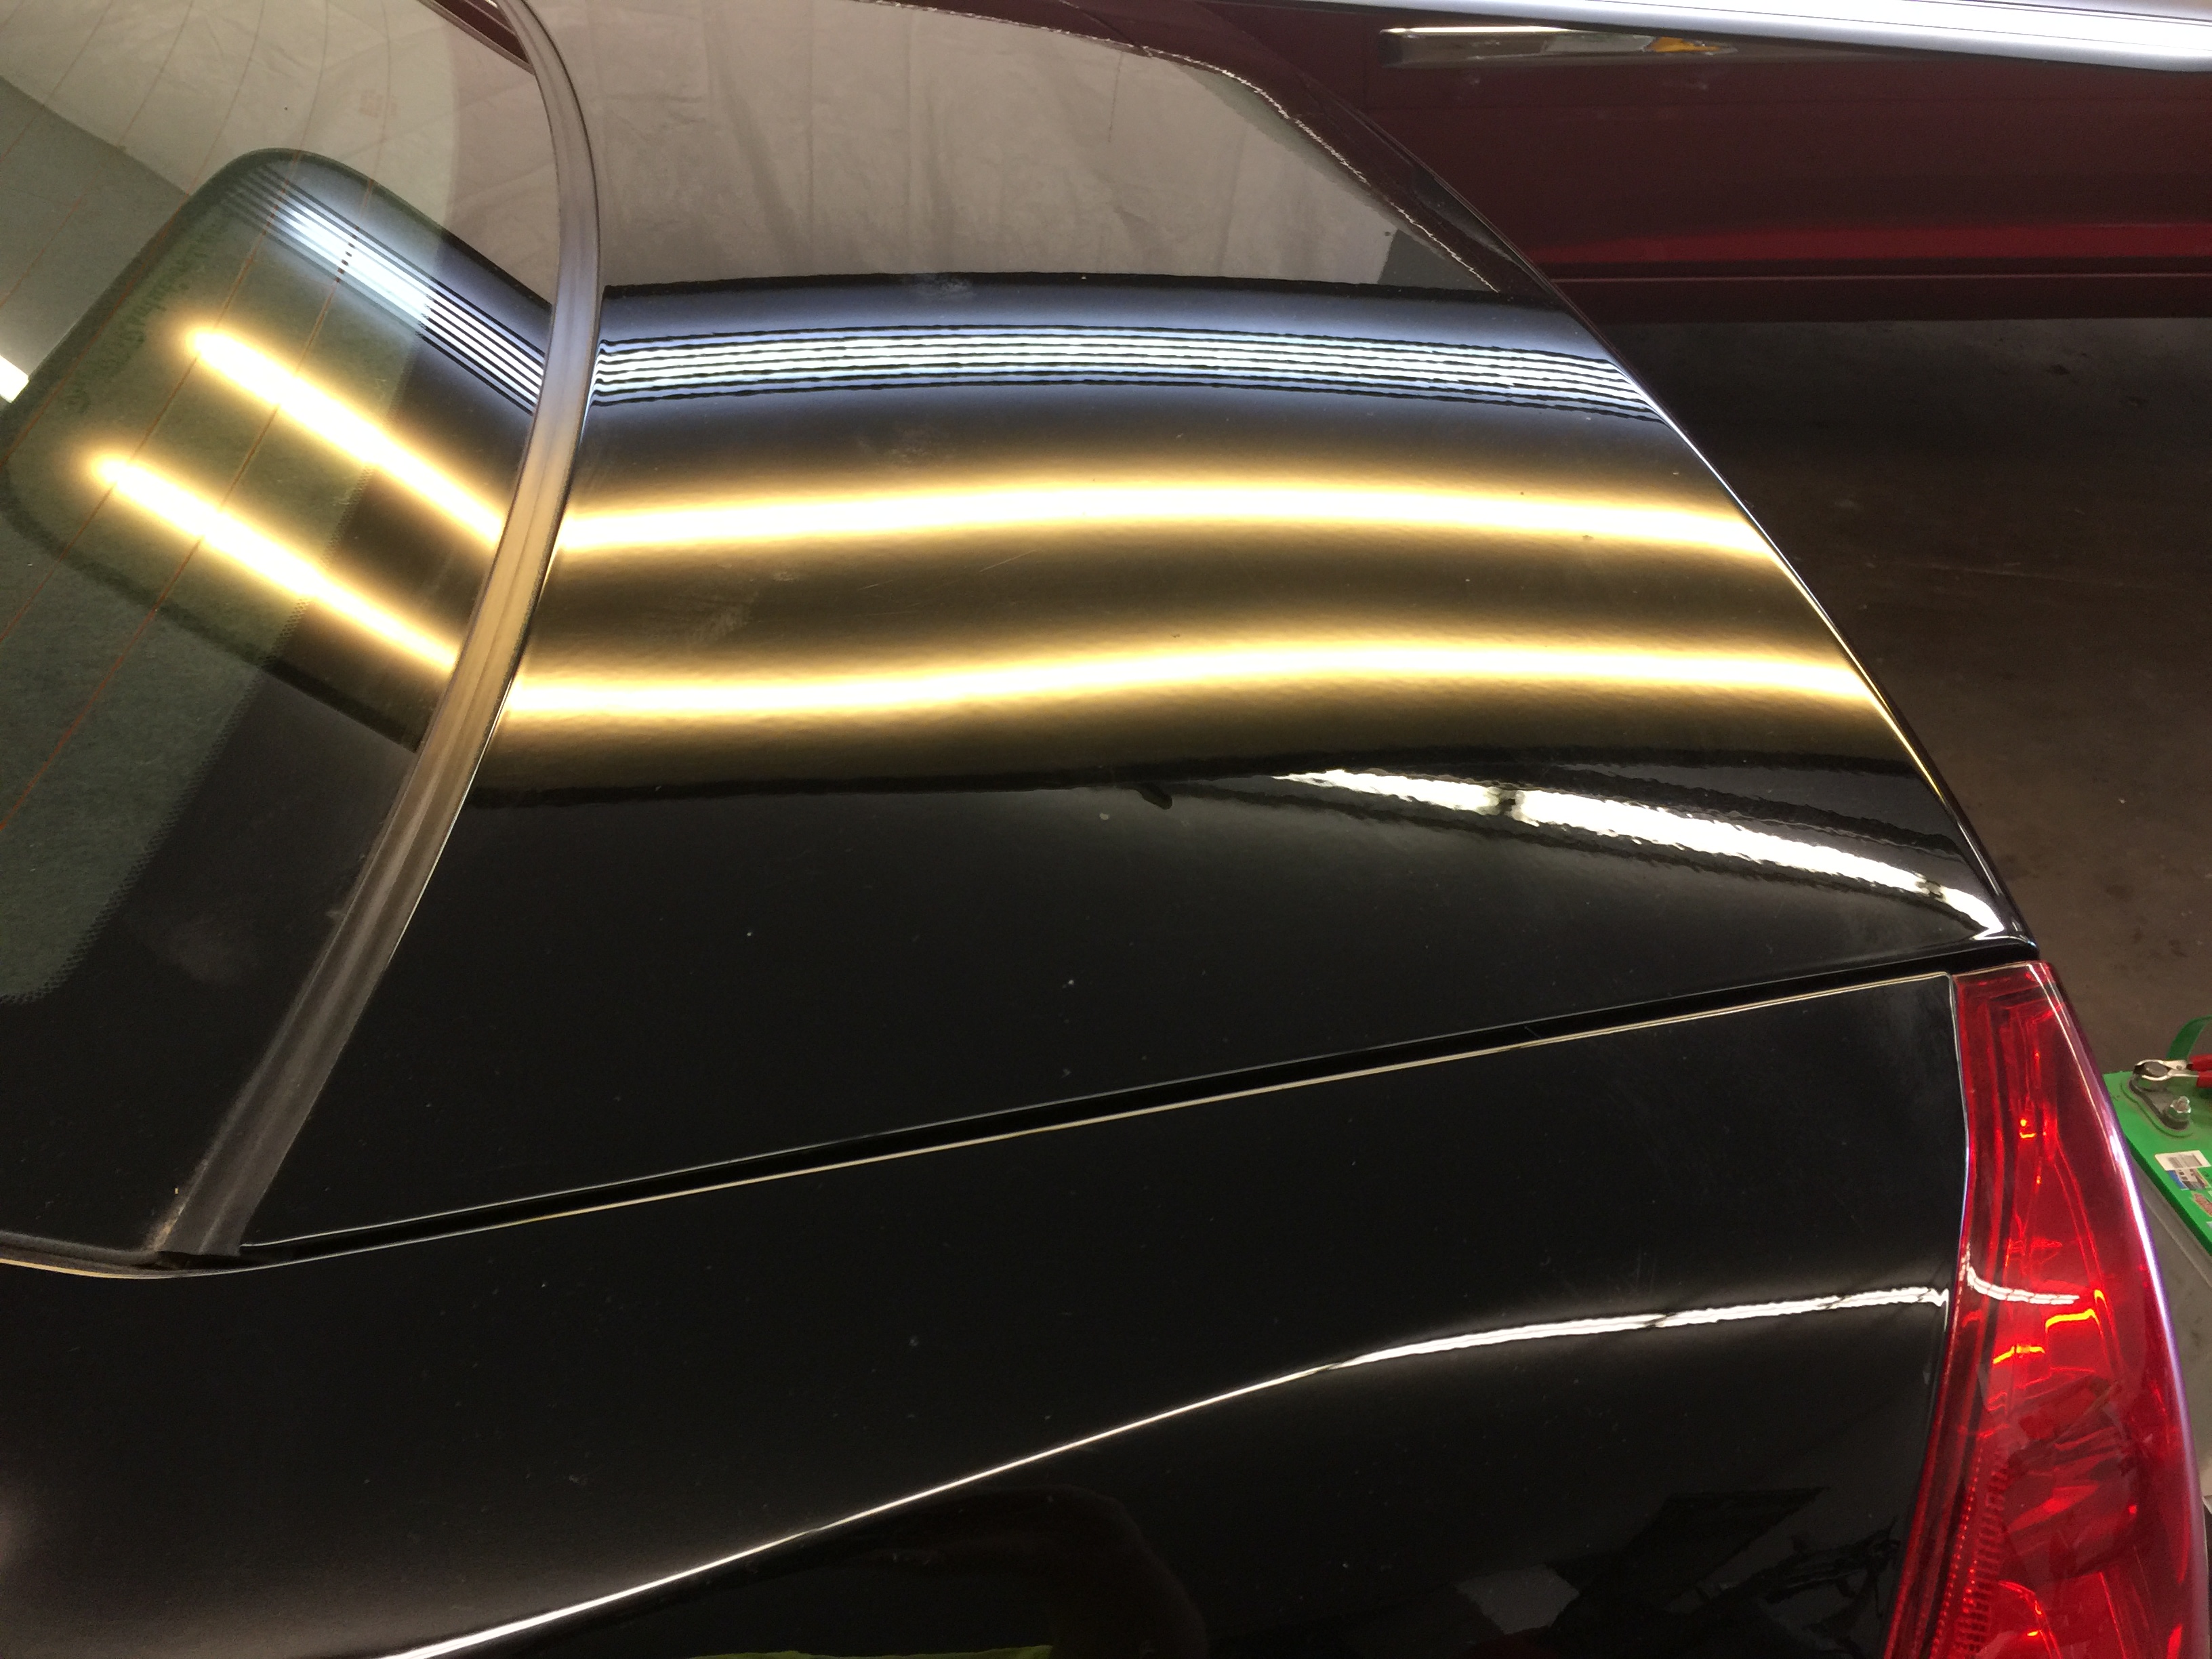 2015 Chevy Impala Hail damage removal on the trunk. Paintless Dent Repair, Paintless Dent Removal, Ding Removal, Springfield, IL, Michael Bocek. http://217dent.com